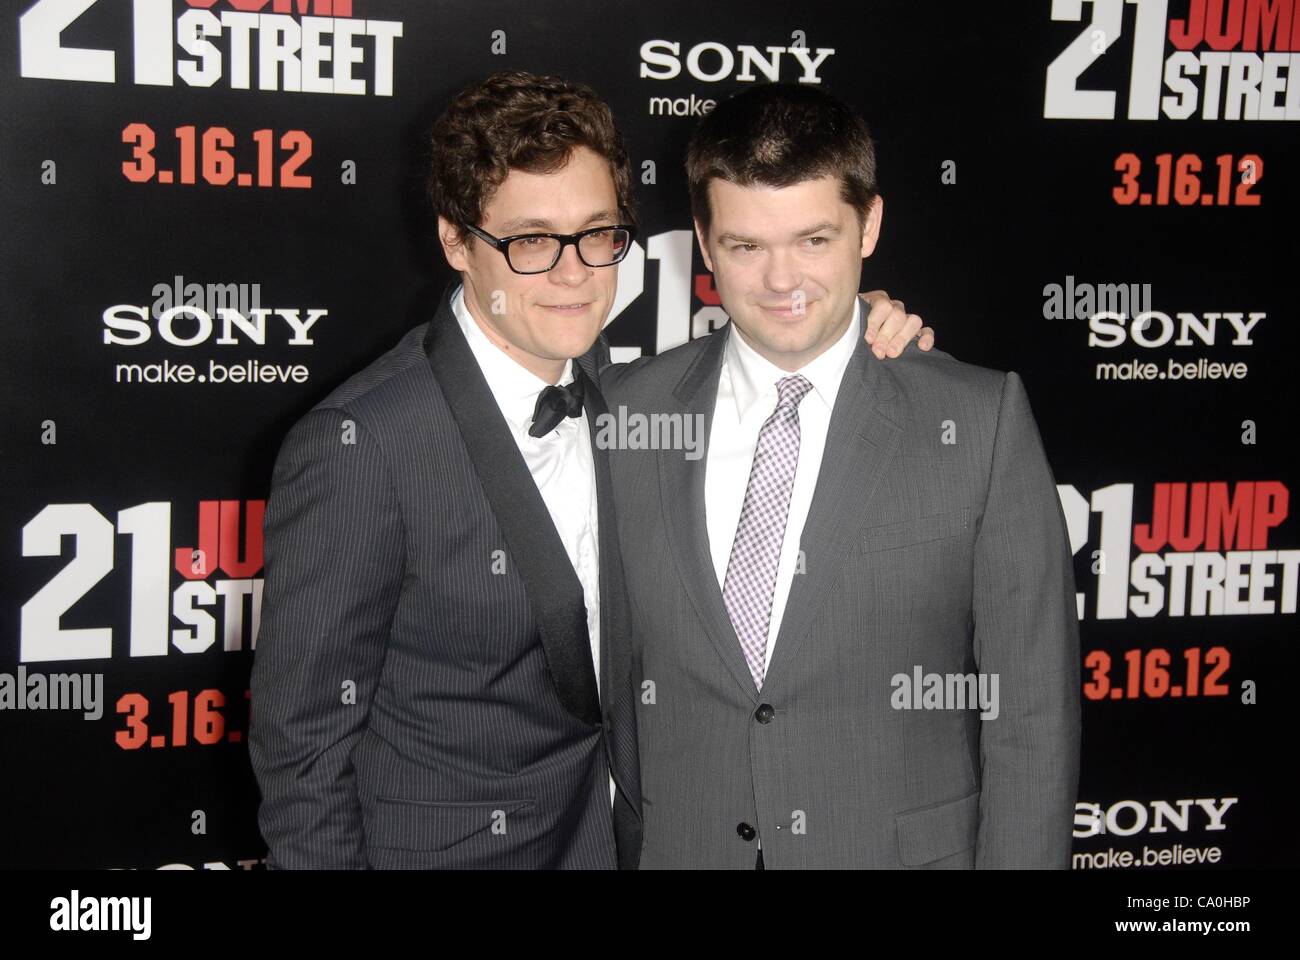 Phil Lord, Chris Miller at arrivals for 21 JUMP STREET Premiere, Grauman's Chinese Theatre, Los Angeles, CA March 13, 2012. Photo By: Dee Cercone/Everett Collection Stock Photo